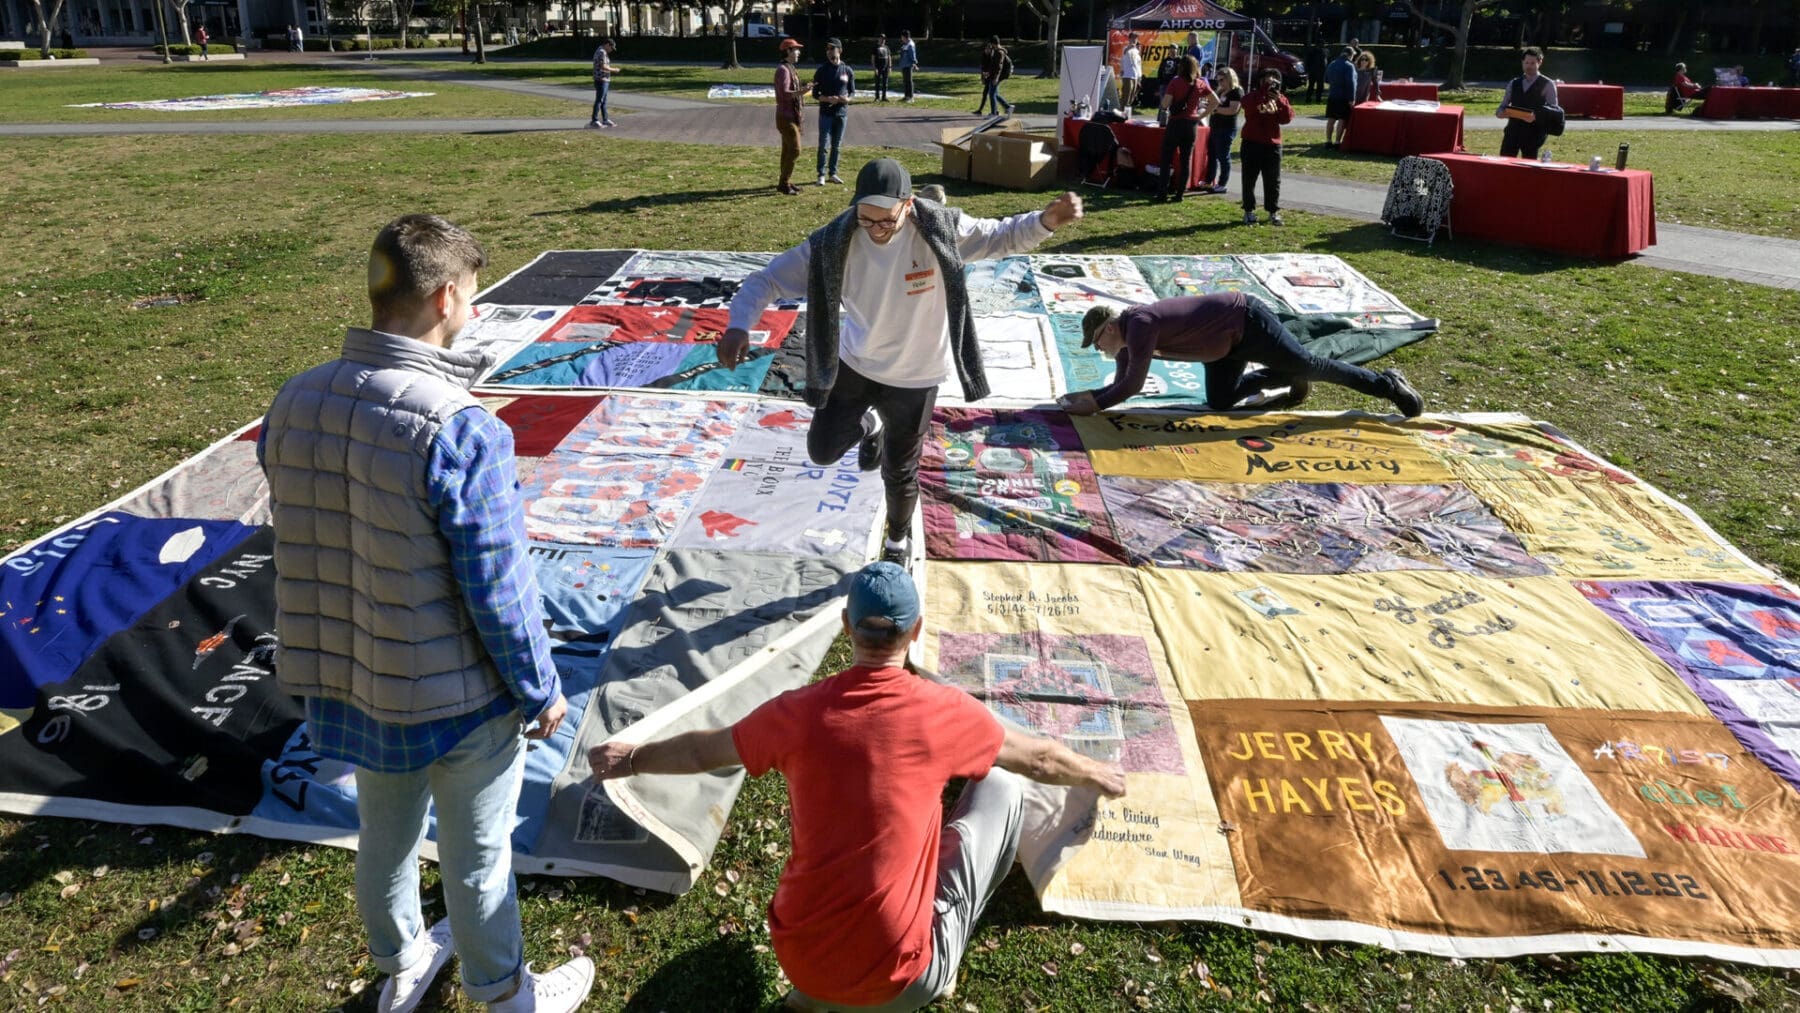 Workers and volunteers assemble sections of the AIDS Quilt out on McCarthy quad during AIDS quilt memorial and life celebration for World AIDS Day, Dec. 1, 2023. (Photo/Gus Ruelas)